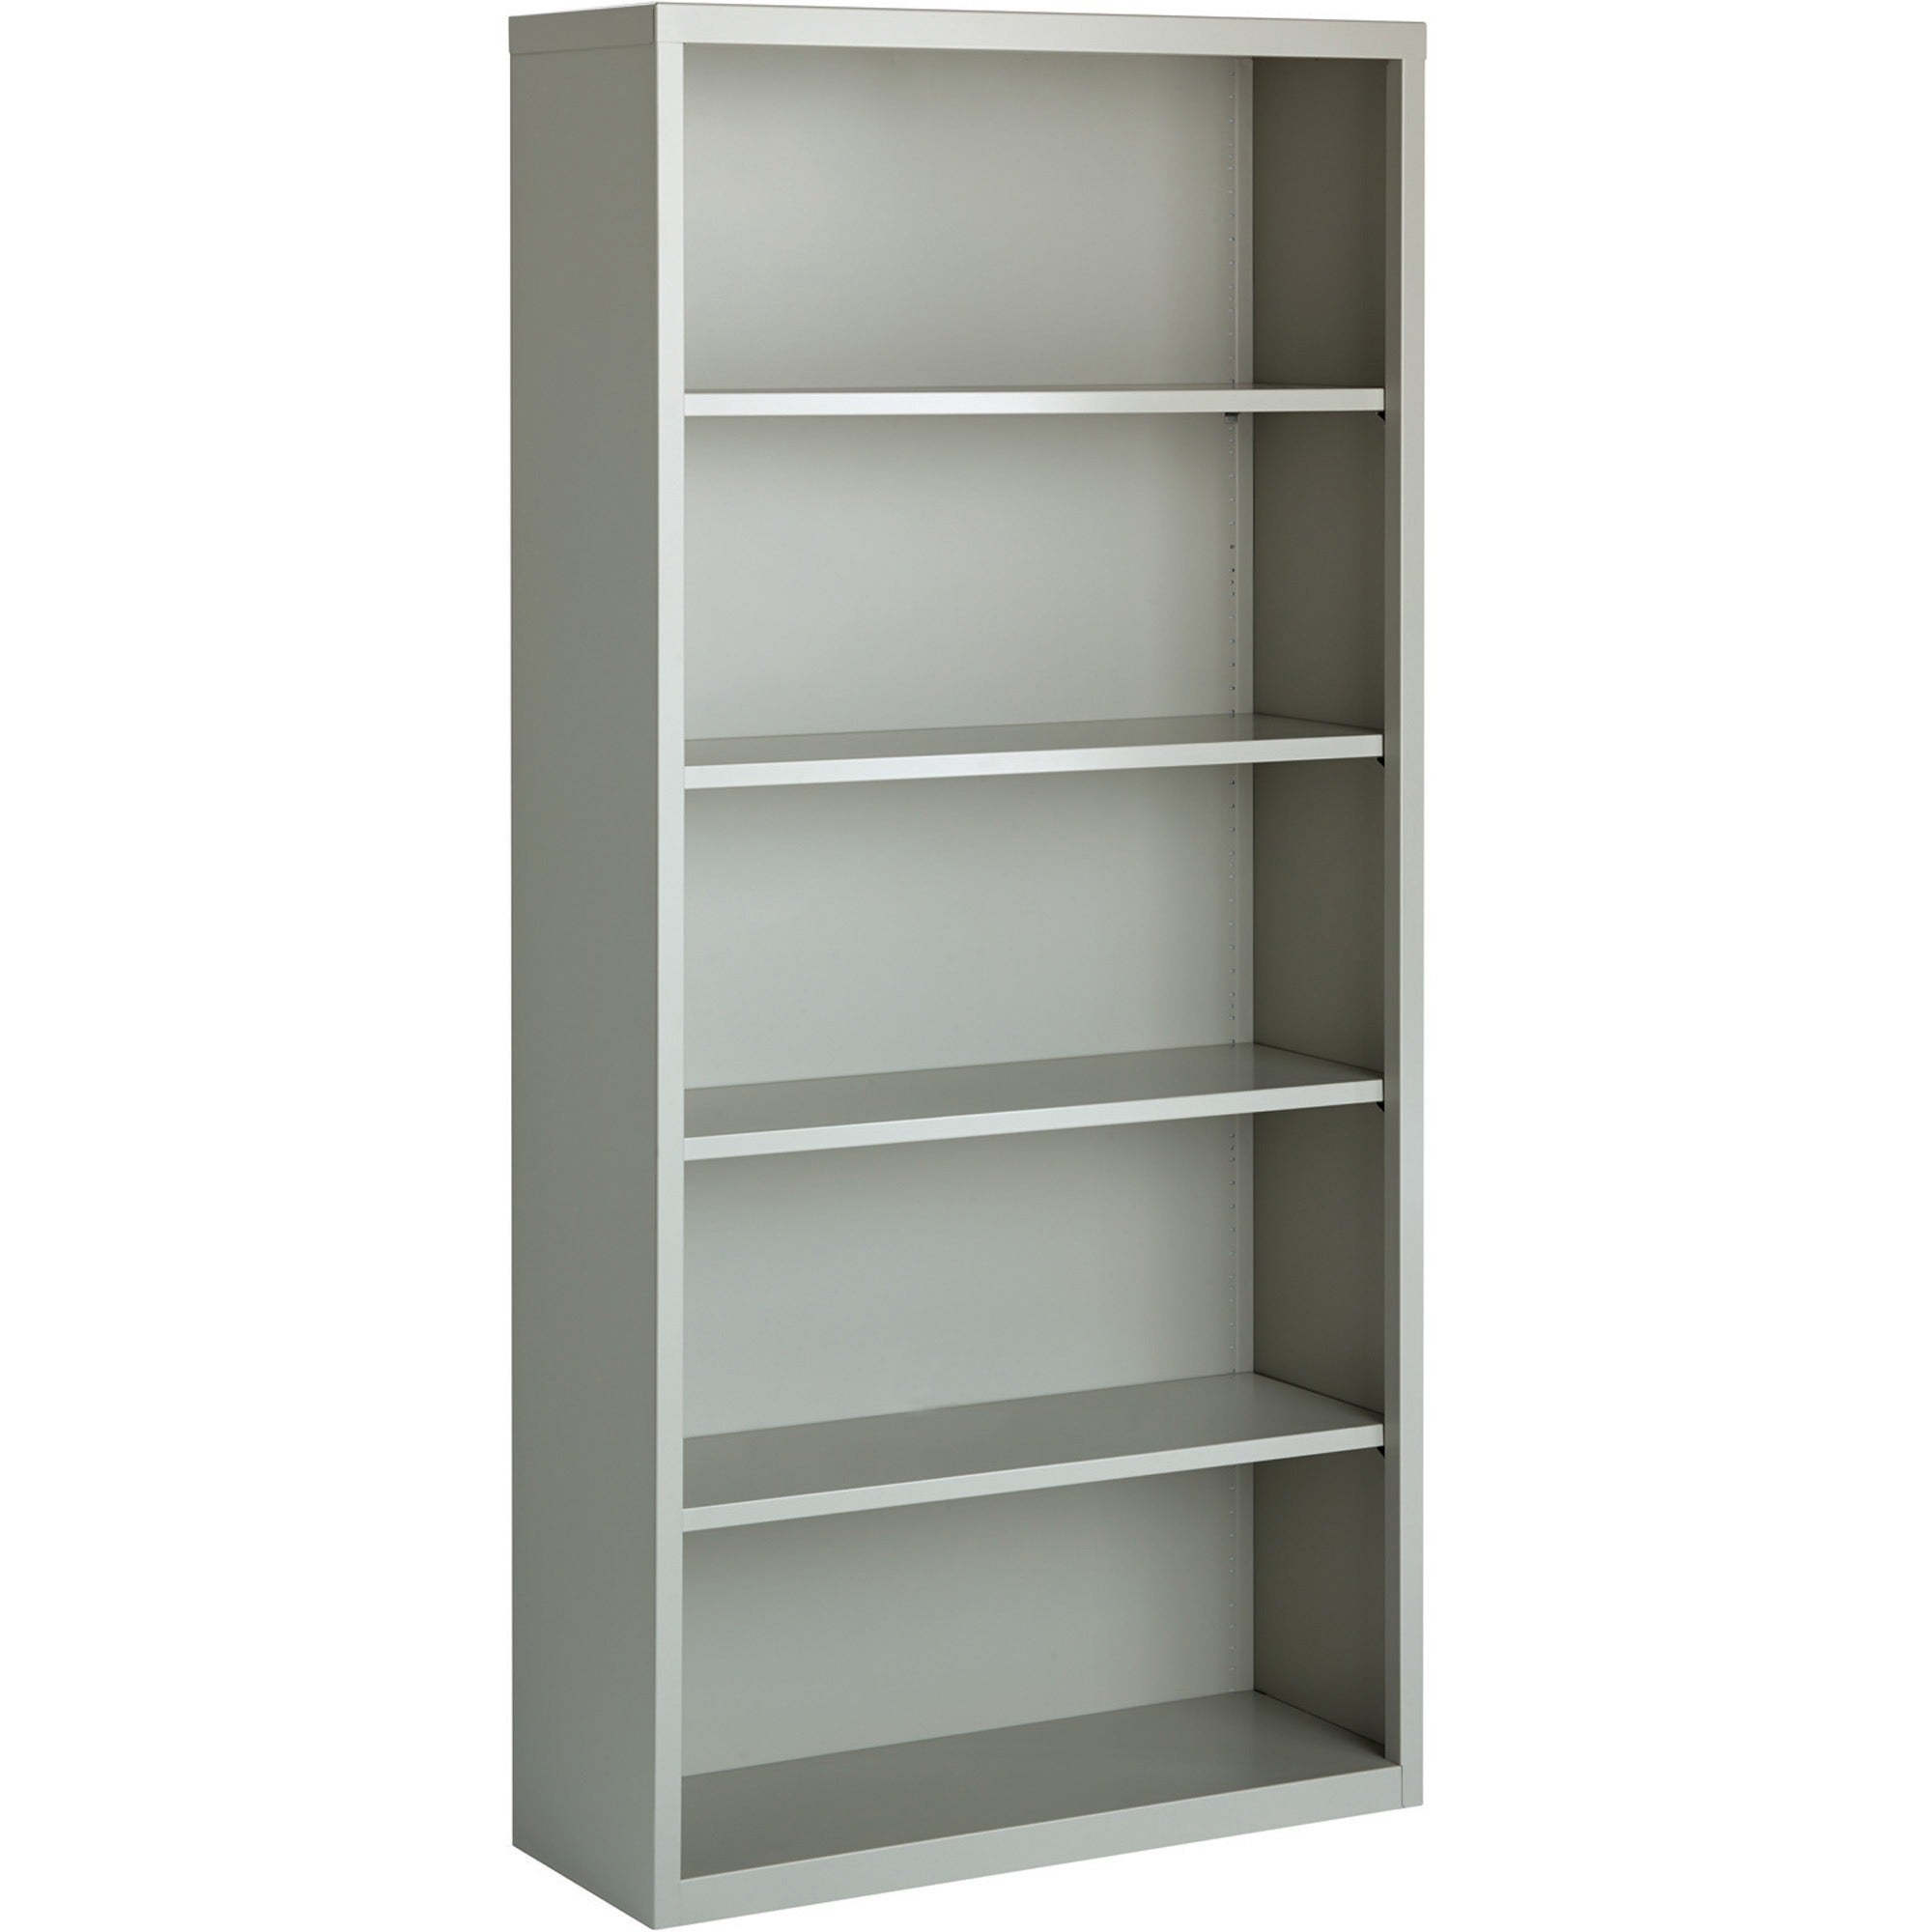 Lorell Fortress Series Bookcase - 34.5" x 13" x 72" - 5 x Shelf(ves) - Light Gray - Powder Coated - Steel - Recycled - 